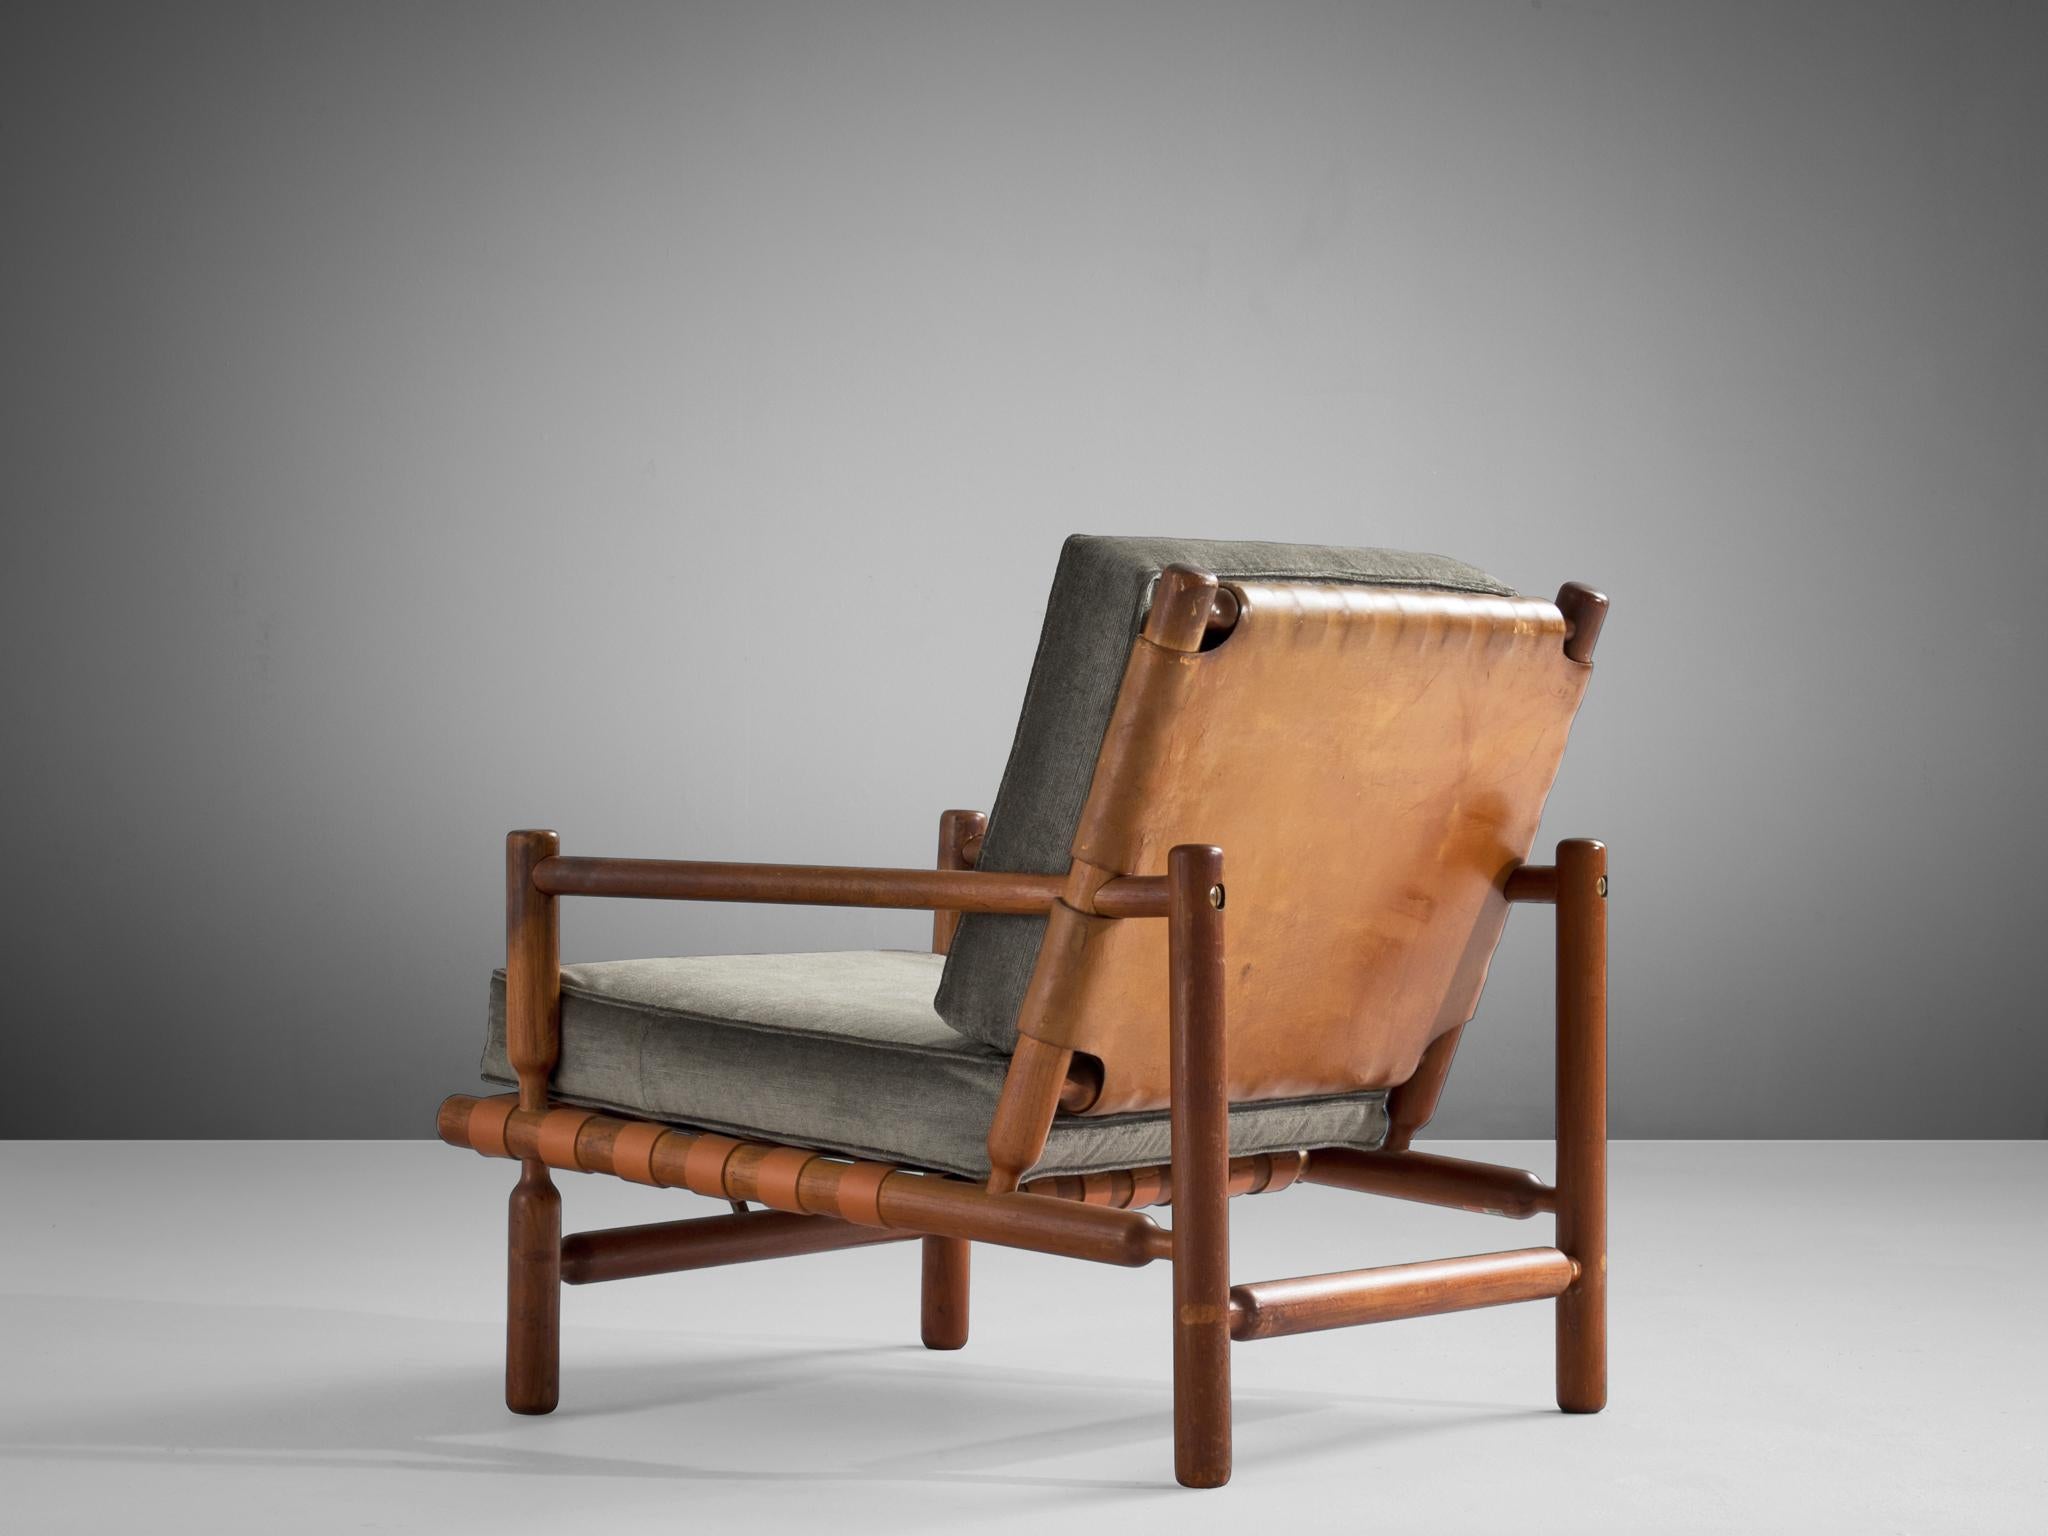 Ilmari Tapiovaara, lounge chair, teak, fabric, leather, Italy, 1957.

Rare lounge chair designed by Ilmari Tapiovaara, made of beautiful supple leather accompanying a solid teak frame. The design was produced in 1957 by the artisan workshop